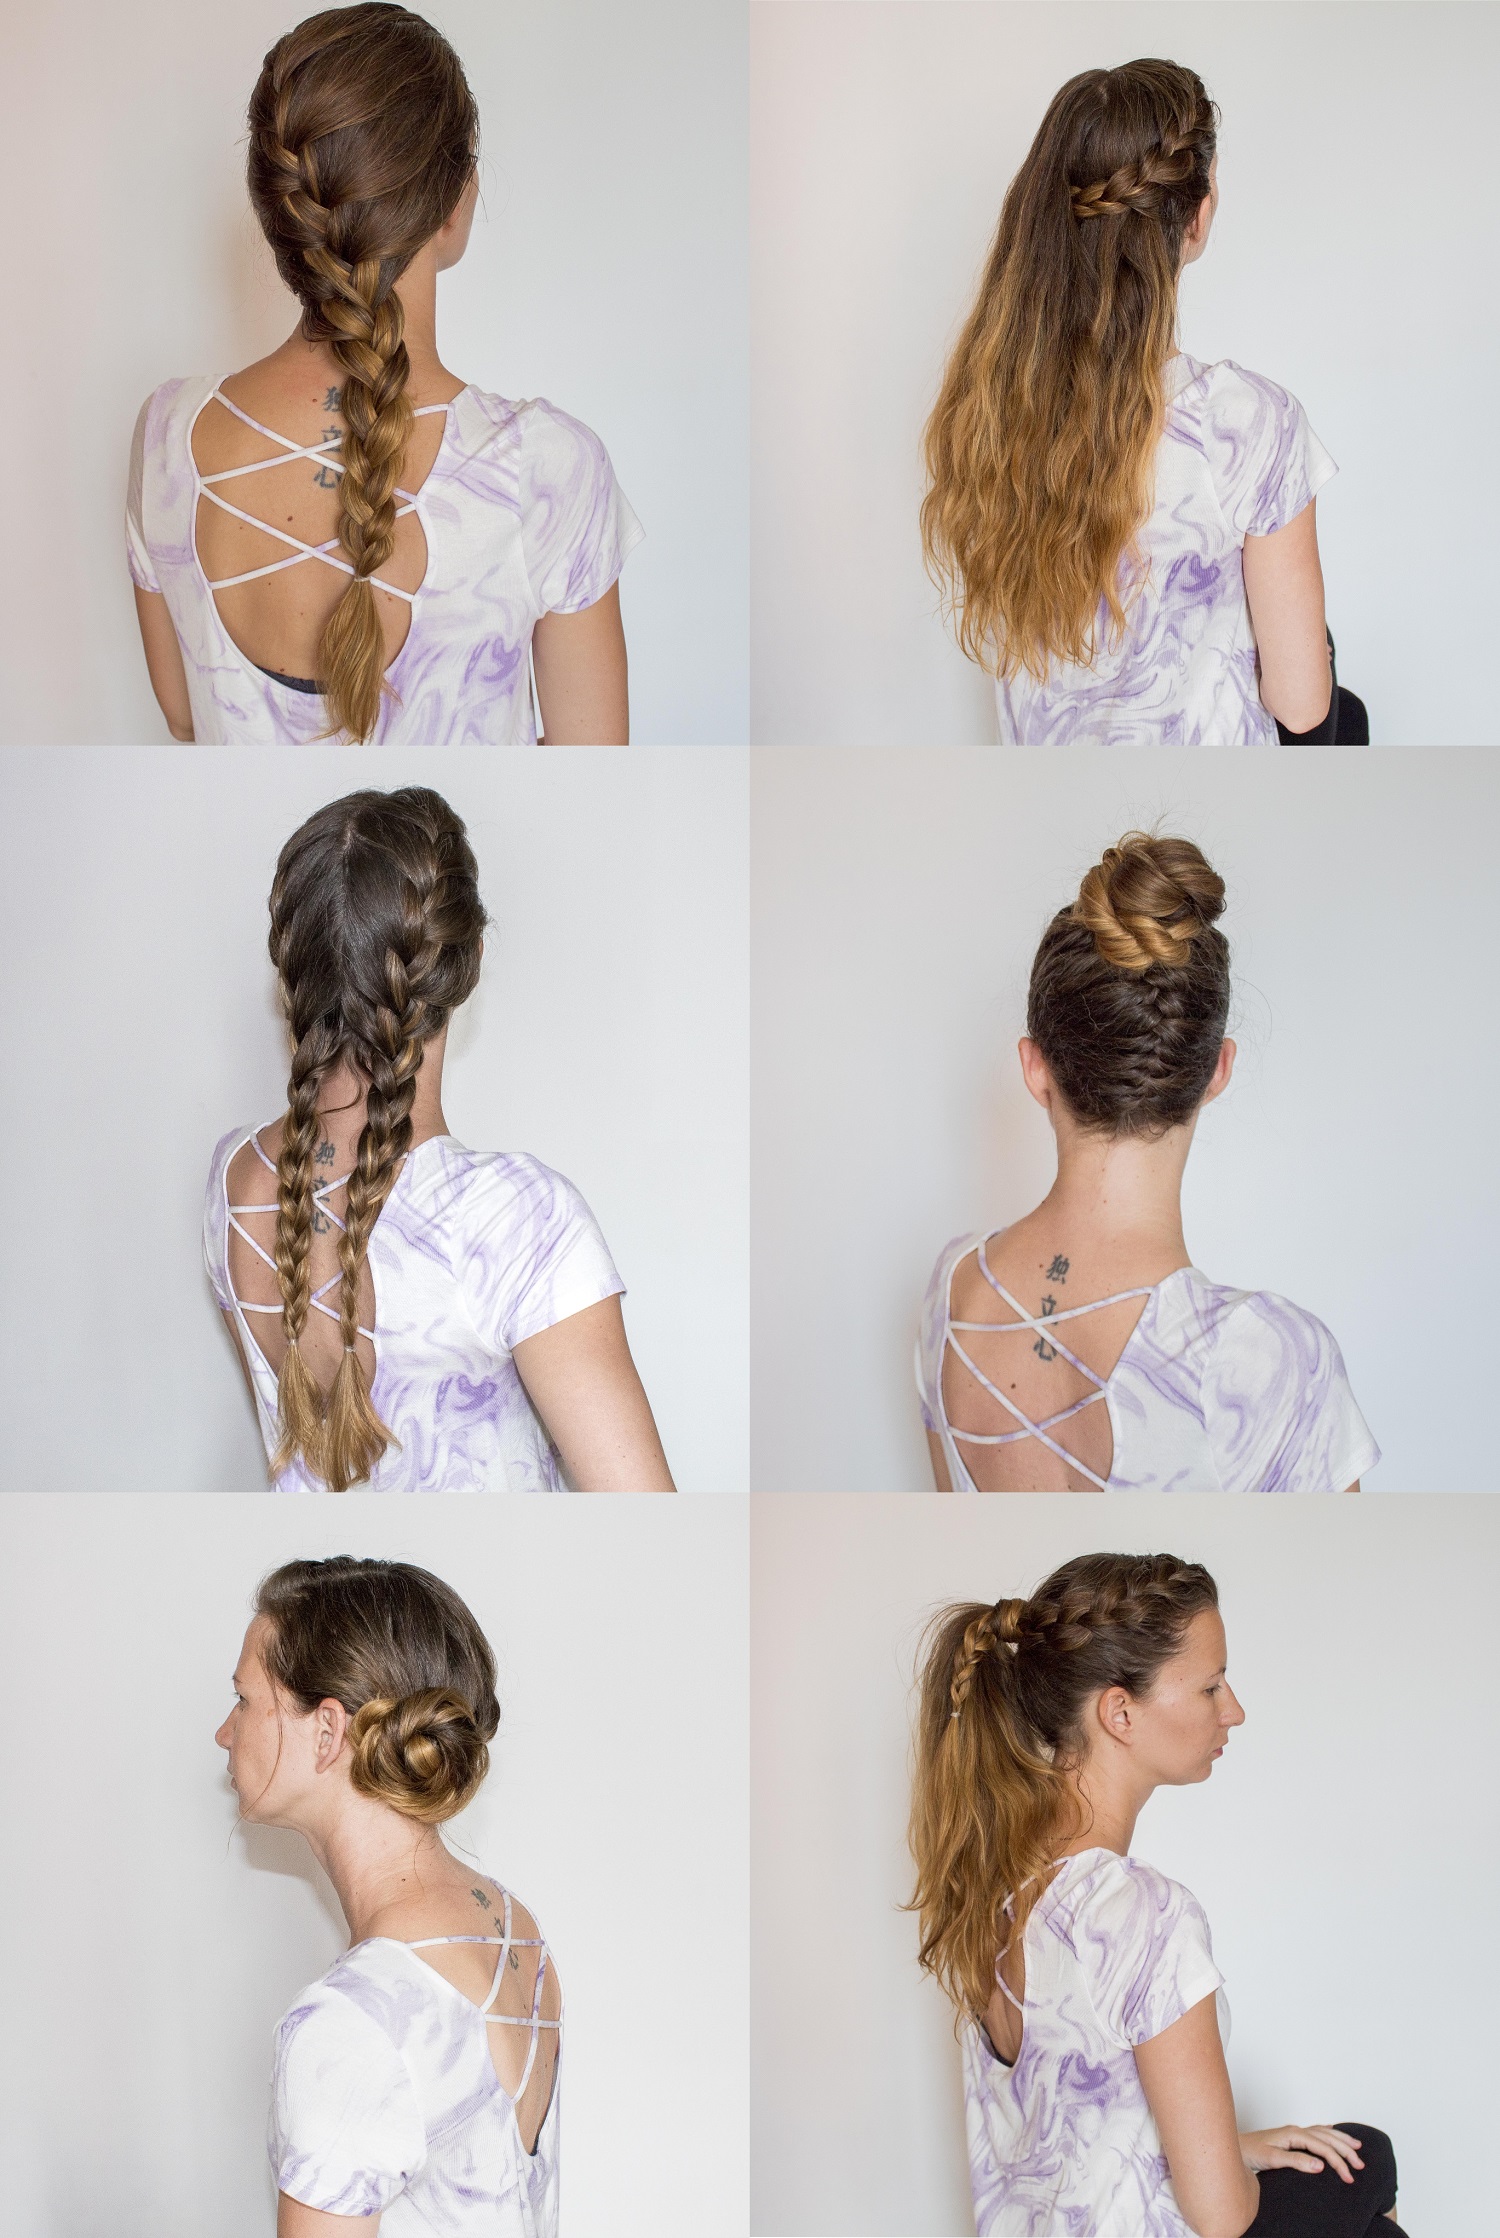 15 Loose French Braid Hairstyles Even The Laziest of Us Can Do